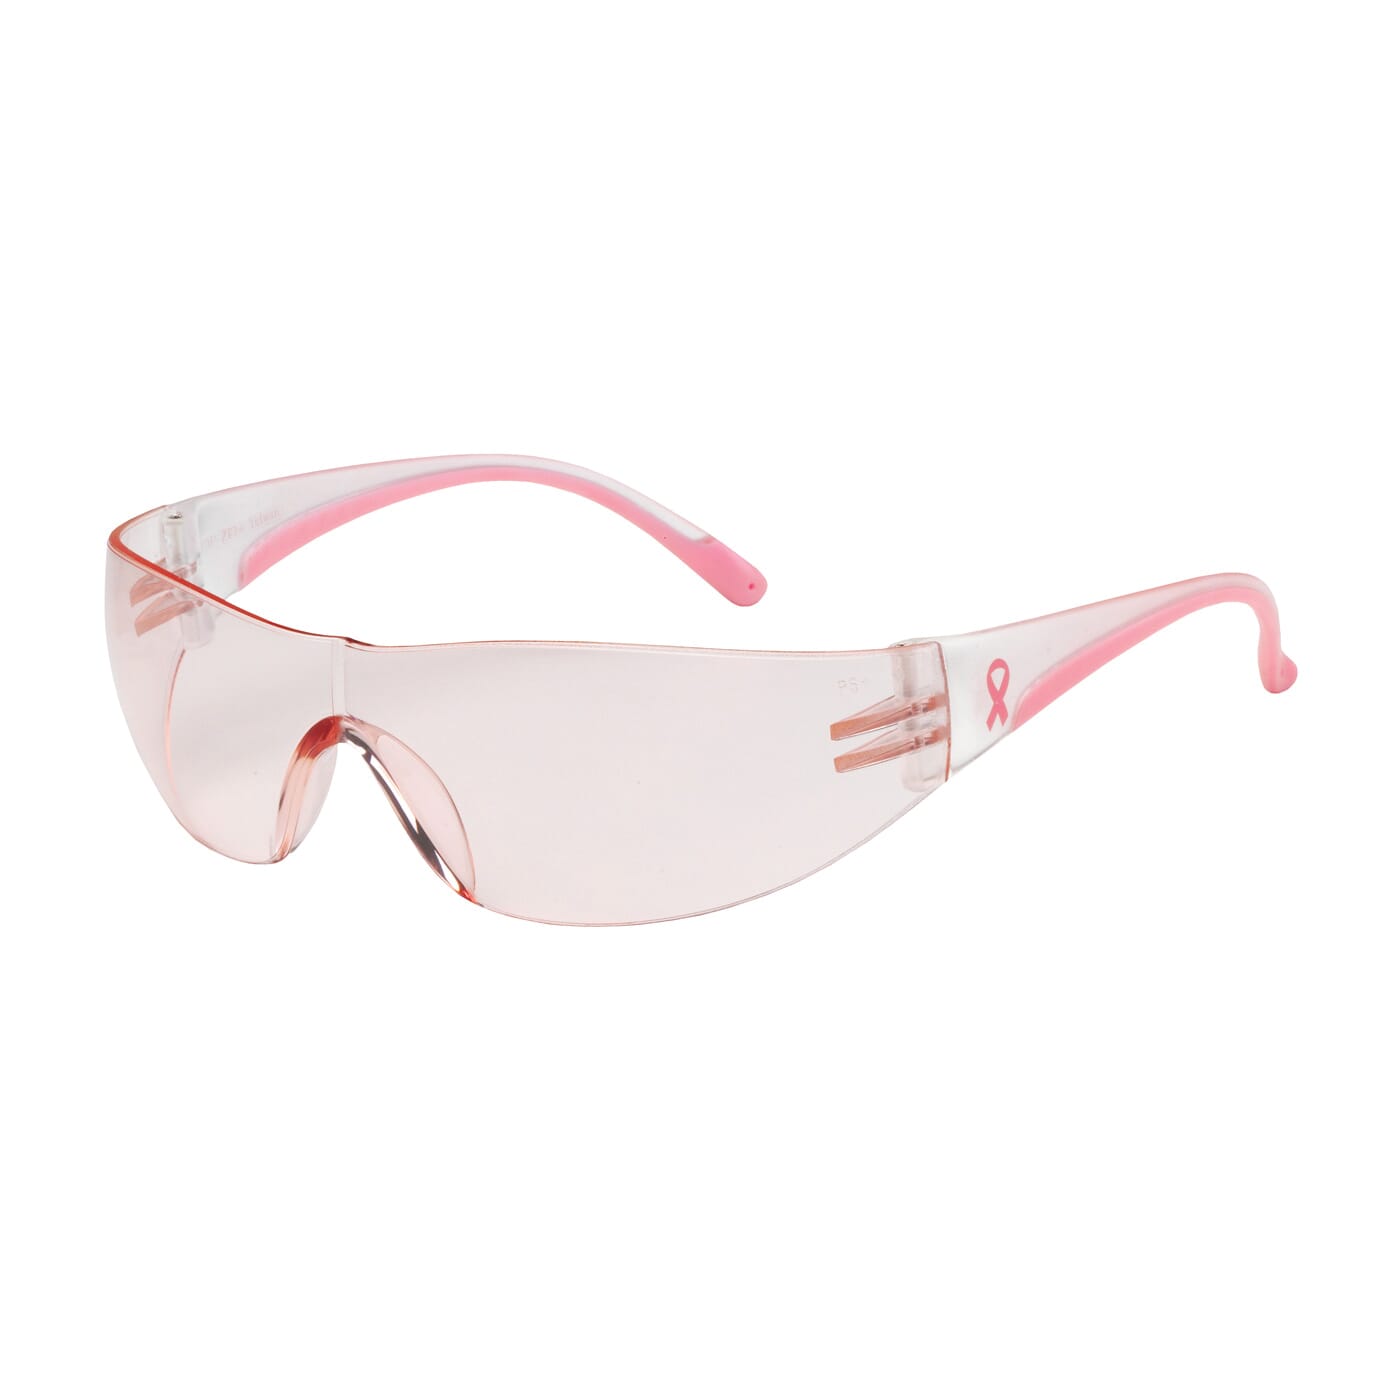 Bouton® 250-10-0904 Eva® Lightweight Protective Glasses, Anti-Scratch, Pink Lens, Rimless Frame, Clear/Pink, Polycarbonate Frame, Polycarbonate Lens, ANSI Z87.1+, CSA Z94.3